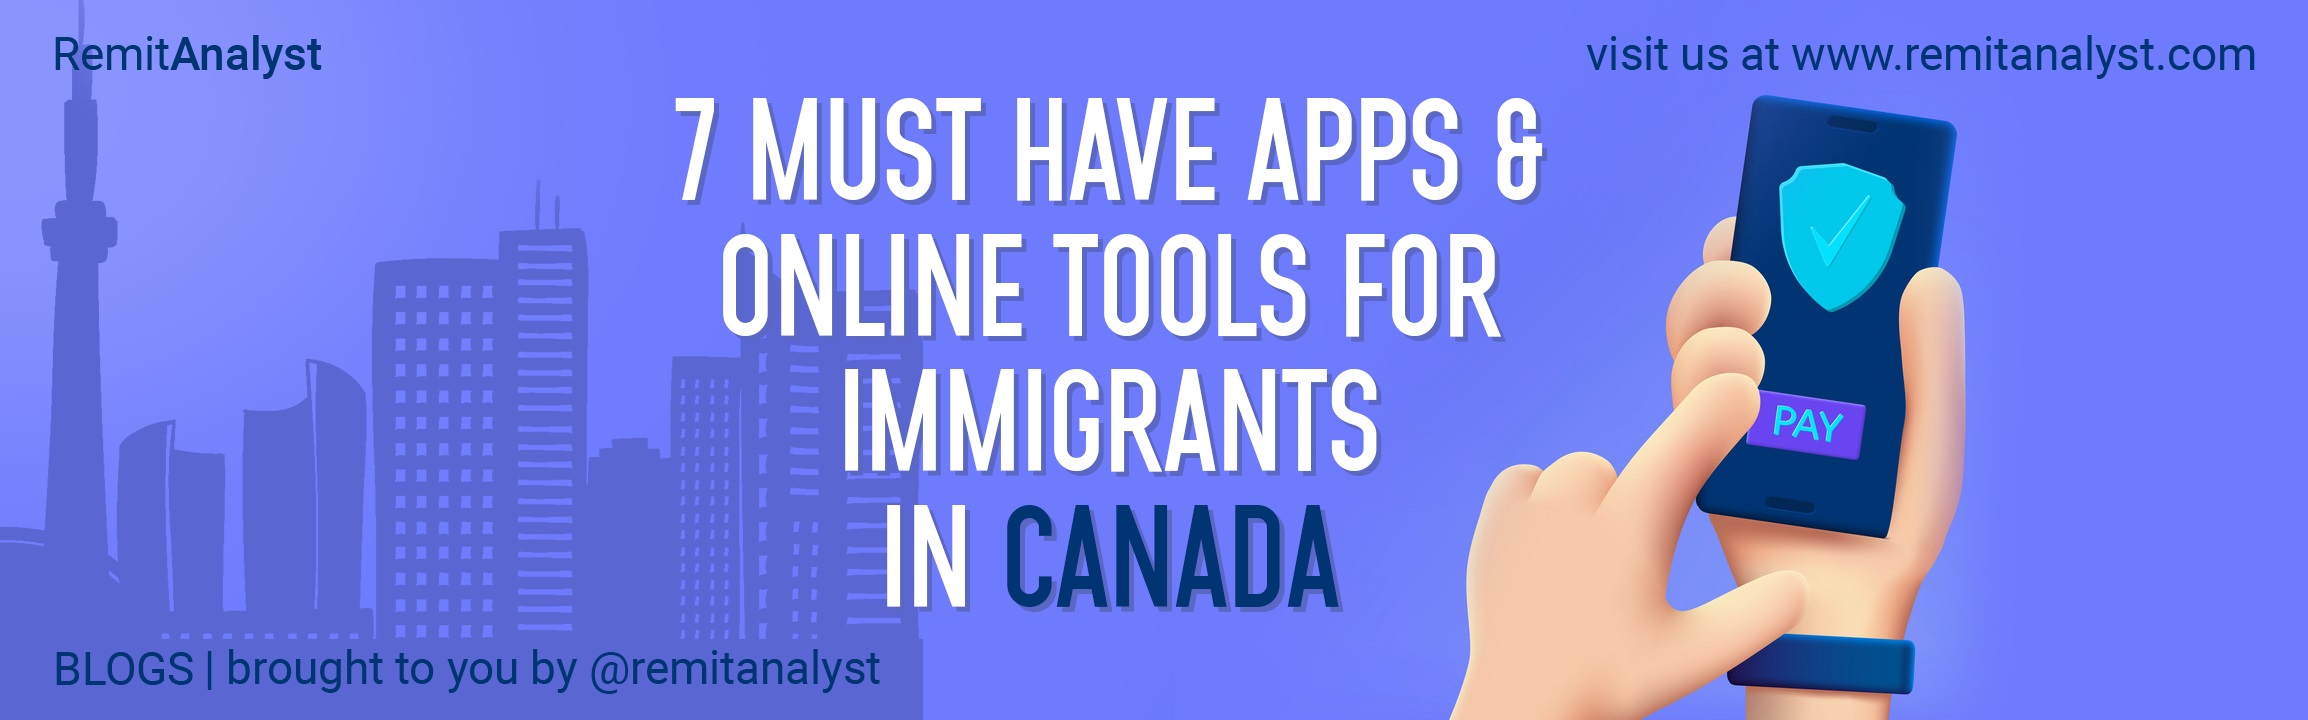 7-must-have-apps-and-online-tools-for-immigrants-in-canada-title